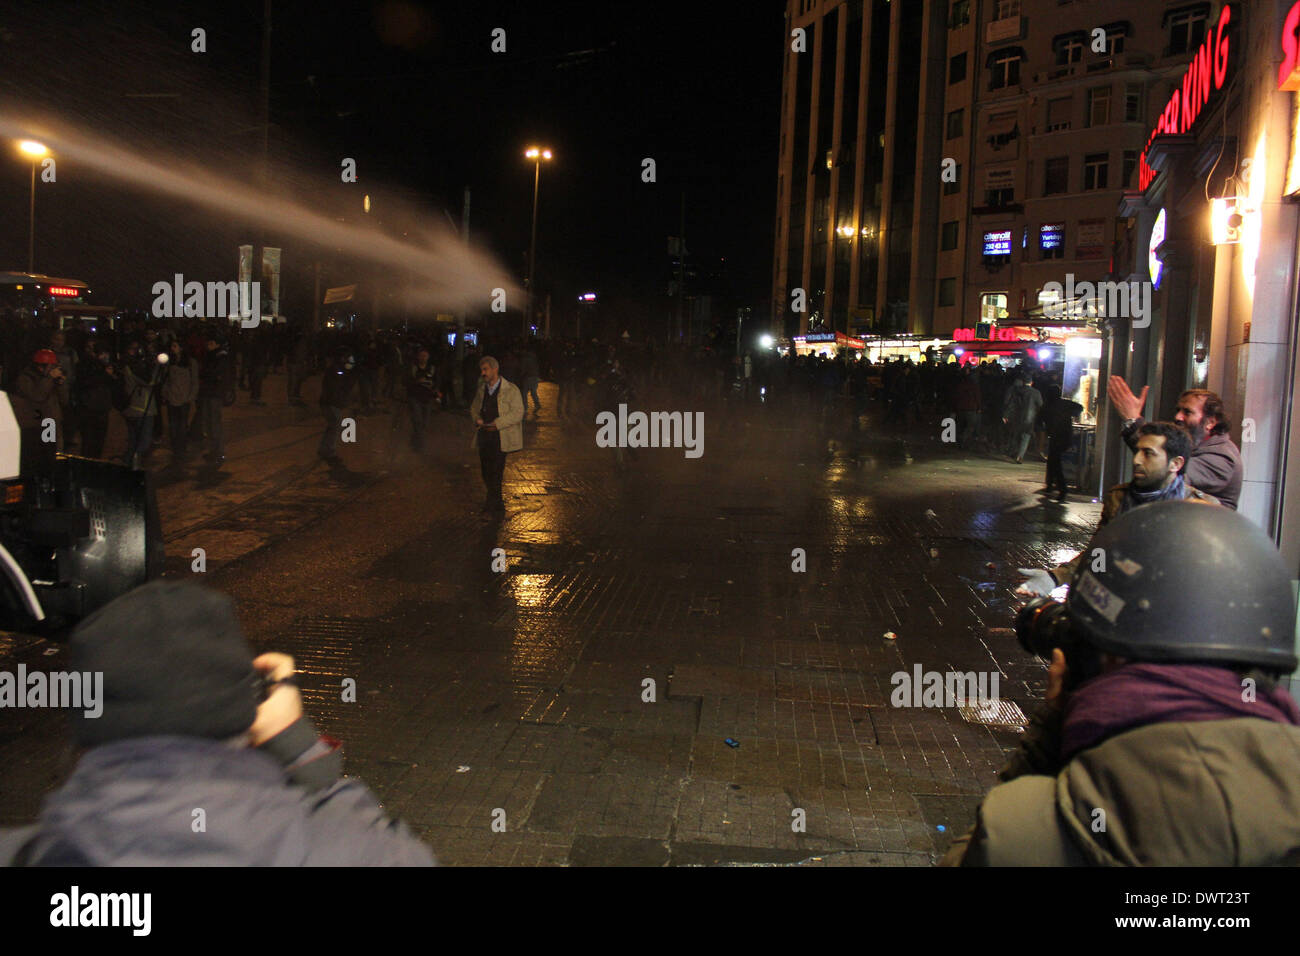 Istanbul, Turkey. 12th Mar, 2014. Riot police disperse protesters with water cannons in Istanbul, Turkey, March 12, 2014. Tension was getting high in Turkey's city of Istanbul on Wednesday as 50,000 people were flocking to a funeral of a 15-year-old student who died Tuesday after 269 days in coma. The death of Berkin Elvan has triggered a nationwide anti-government protests in more than 30 cities in Turkey. Elvan was sent into a coma after sustaining a head injury from a gas canister as he went to buy bread during a police crackdown in Istanbul last June. Credit:  Cihan/Xinhua/Alamy Live News Stock Photo